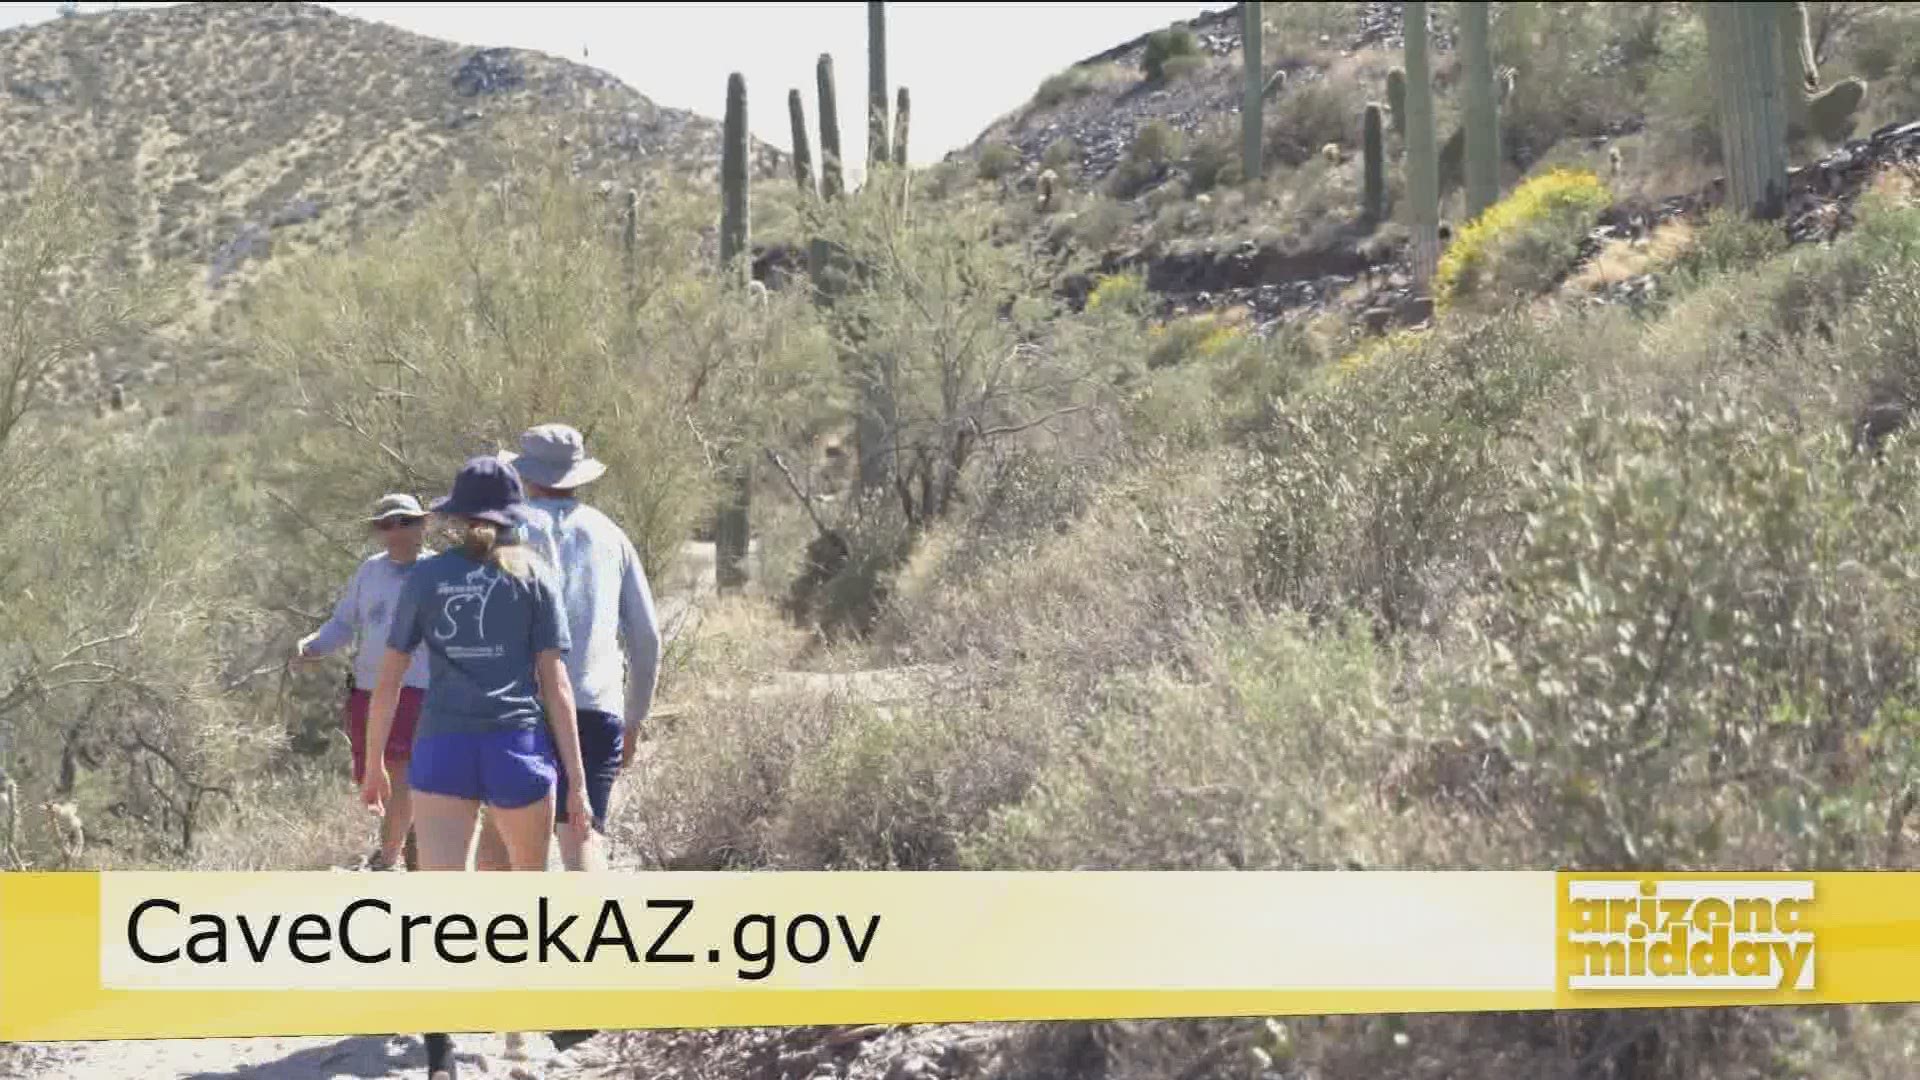 Check out what the Town of Cave Creek has to offer from hiking, biking, trail rides and more.